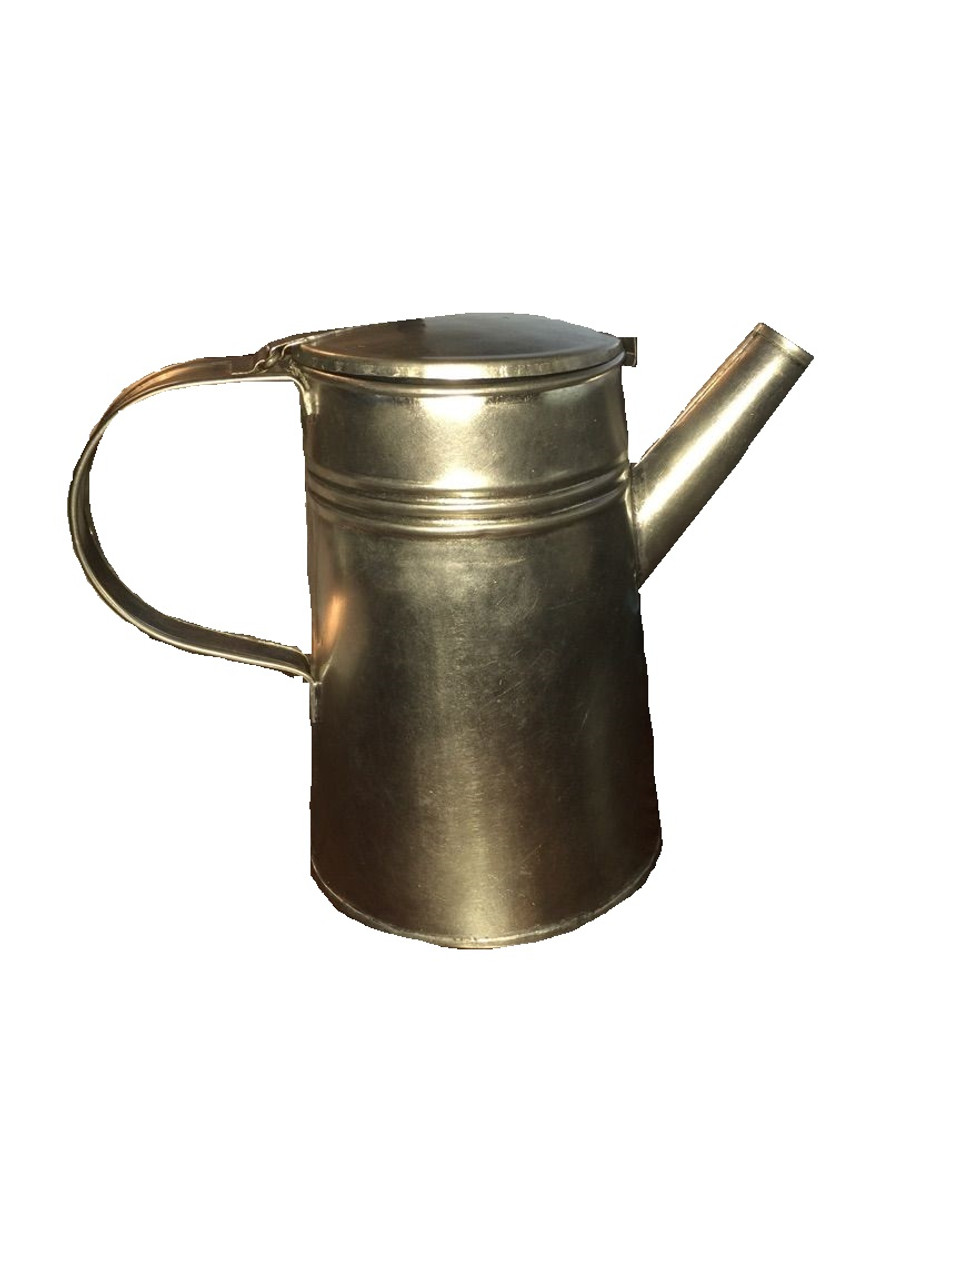 Coffee Pot - Small personal size - South Union Mills